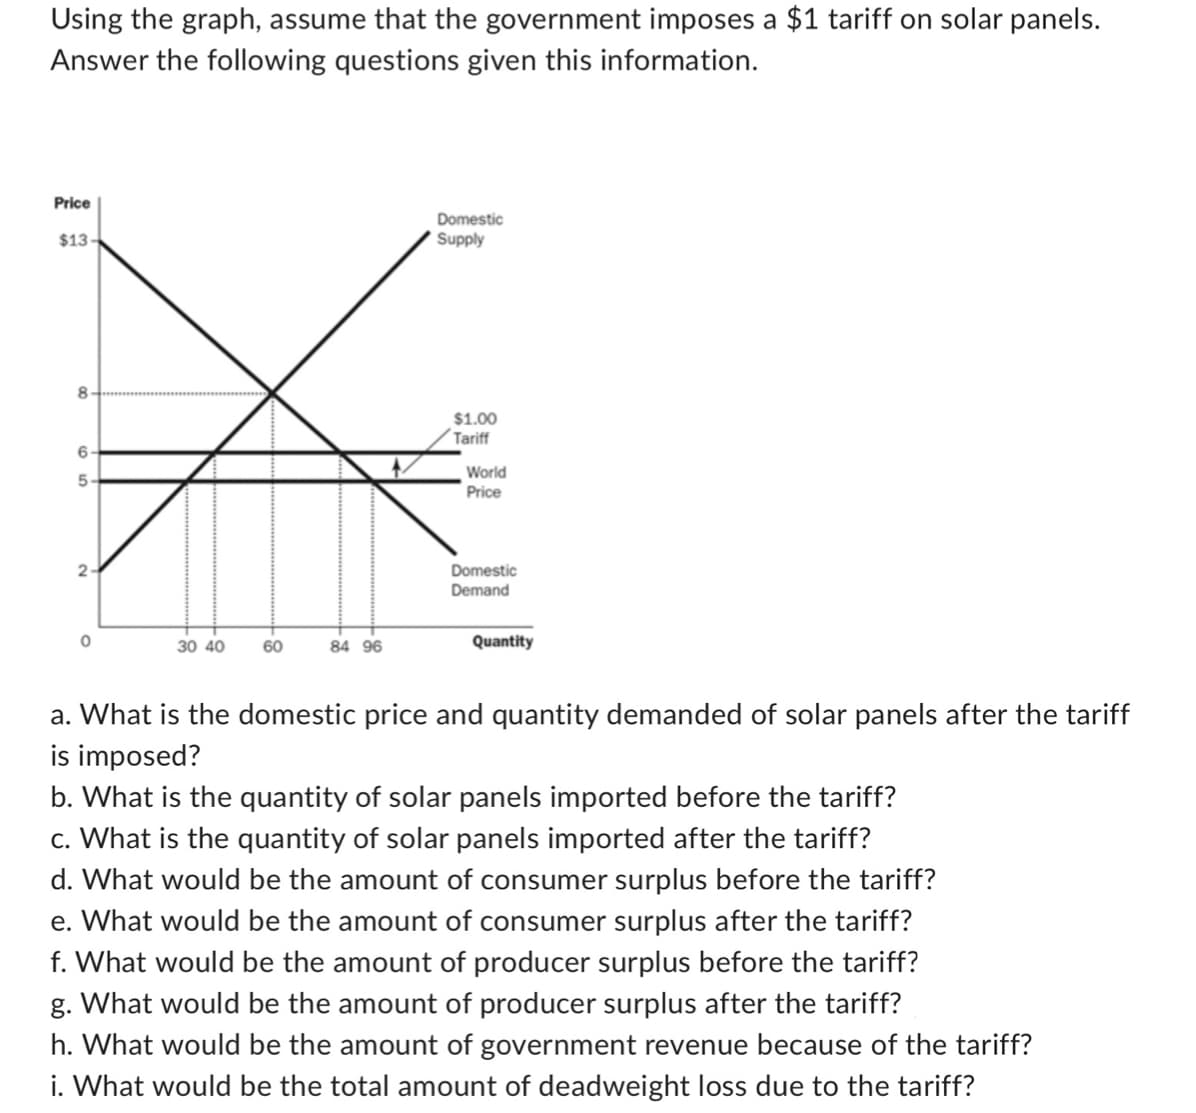 2
Using the graph, assume that the government imposes a $1 tariff on solar panels.
Answer the following questions given this information.
Price
$13
65
8
Domestic
Supply
$1.00
Tariff
World
Price
Domestic
Demand
о
30 40
60
84 96
Quantity
a. What is the domestic price and quantity demanded of solar panels after the tariff
is imposed?
b. What is the quantity of solar panels imported before the tariff?
c. What is the quantity of solar panels imported after the tariff?
d. What would be the amount of consumer surplus before the tariff?
e. What would be the amount of consumer surplus after the tariff?
f. What would be the amount of producer surplus before the tariff?
g. What would be the amount of producer surplus after the tariff?
h. What would be the amount of government revenue because of the tariff?
i. What would be the total amount of deadweight loss due to the tariff?